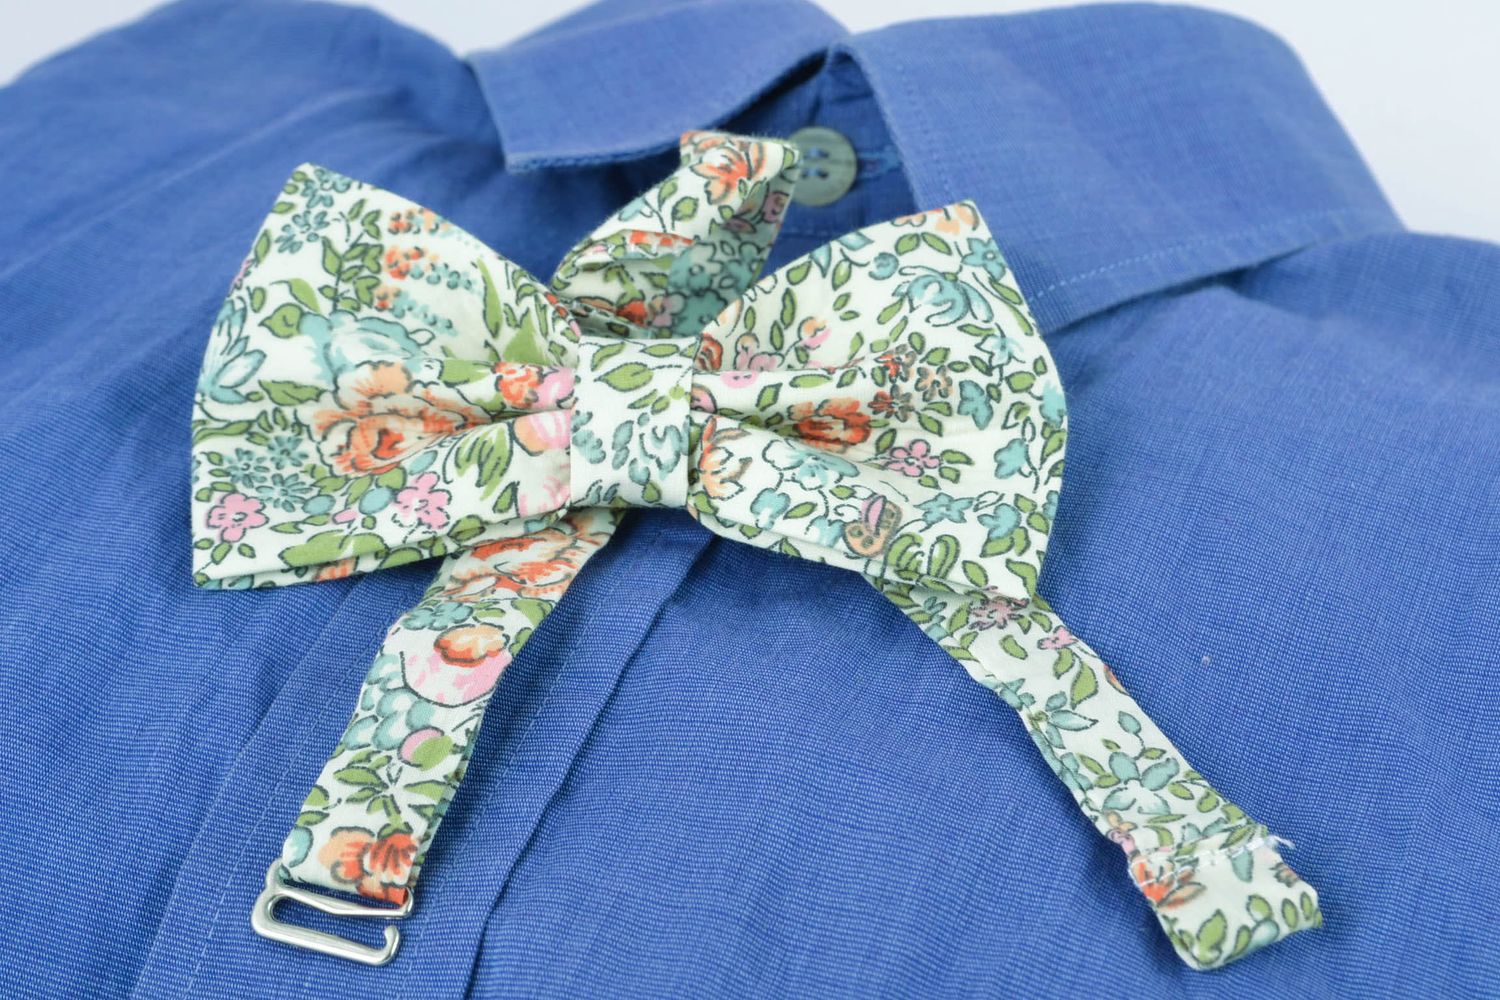 Handmade fabric bow tie with floral print photo 1